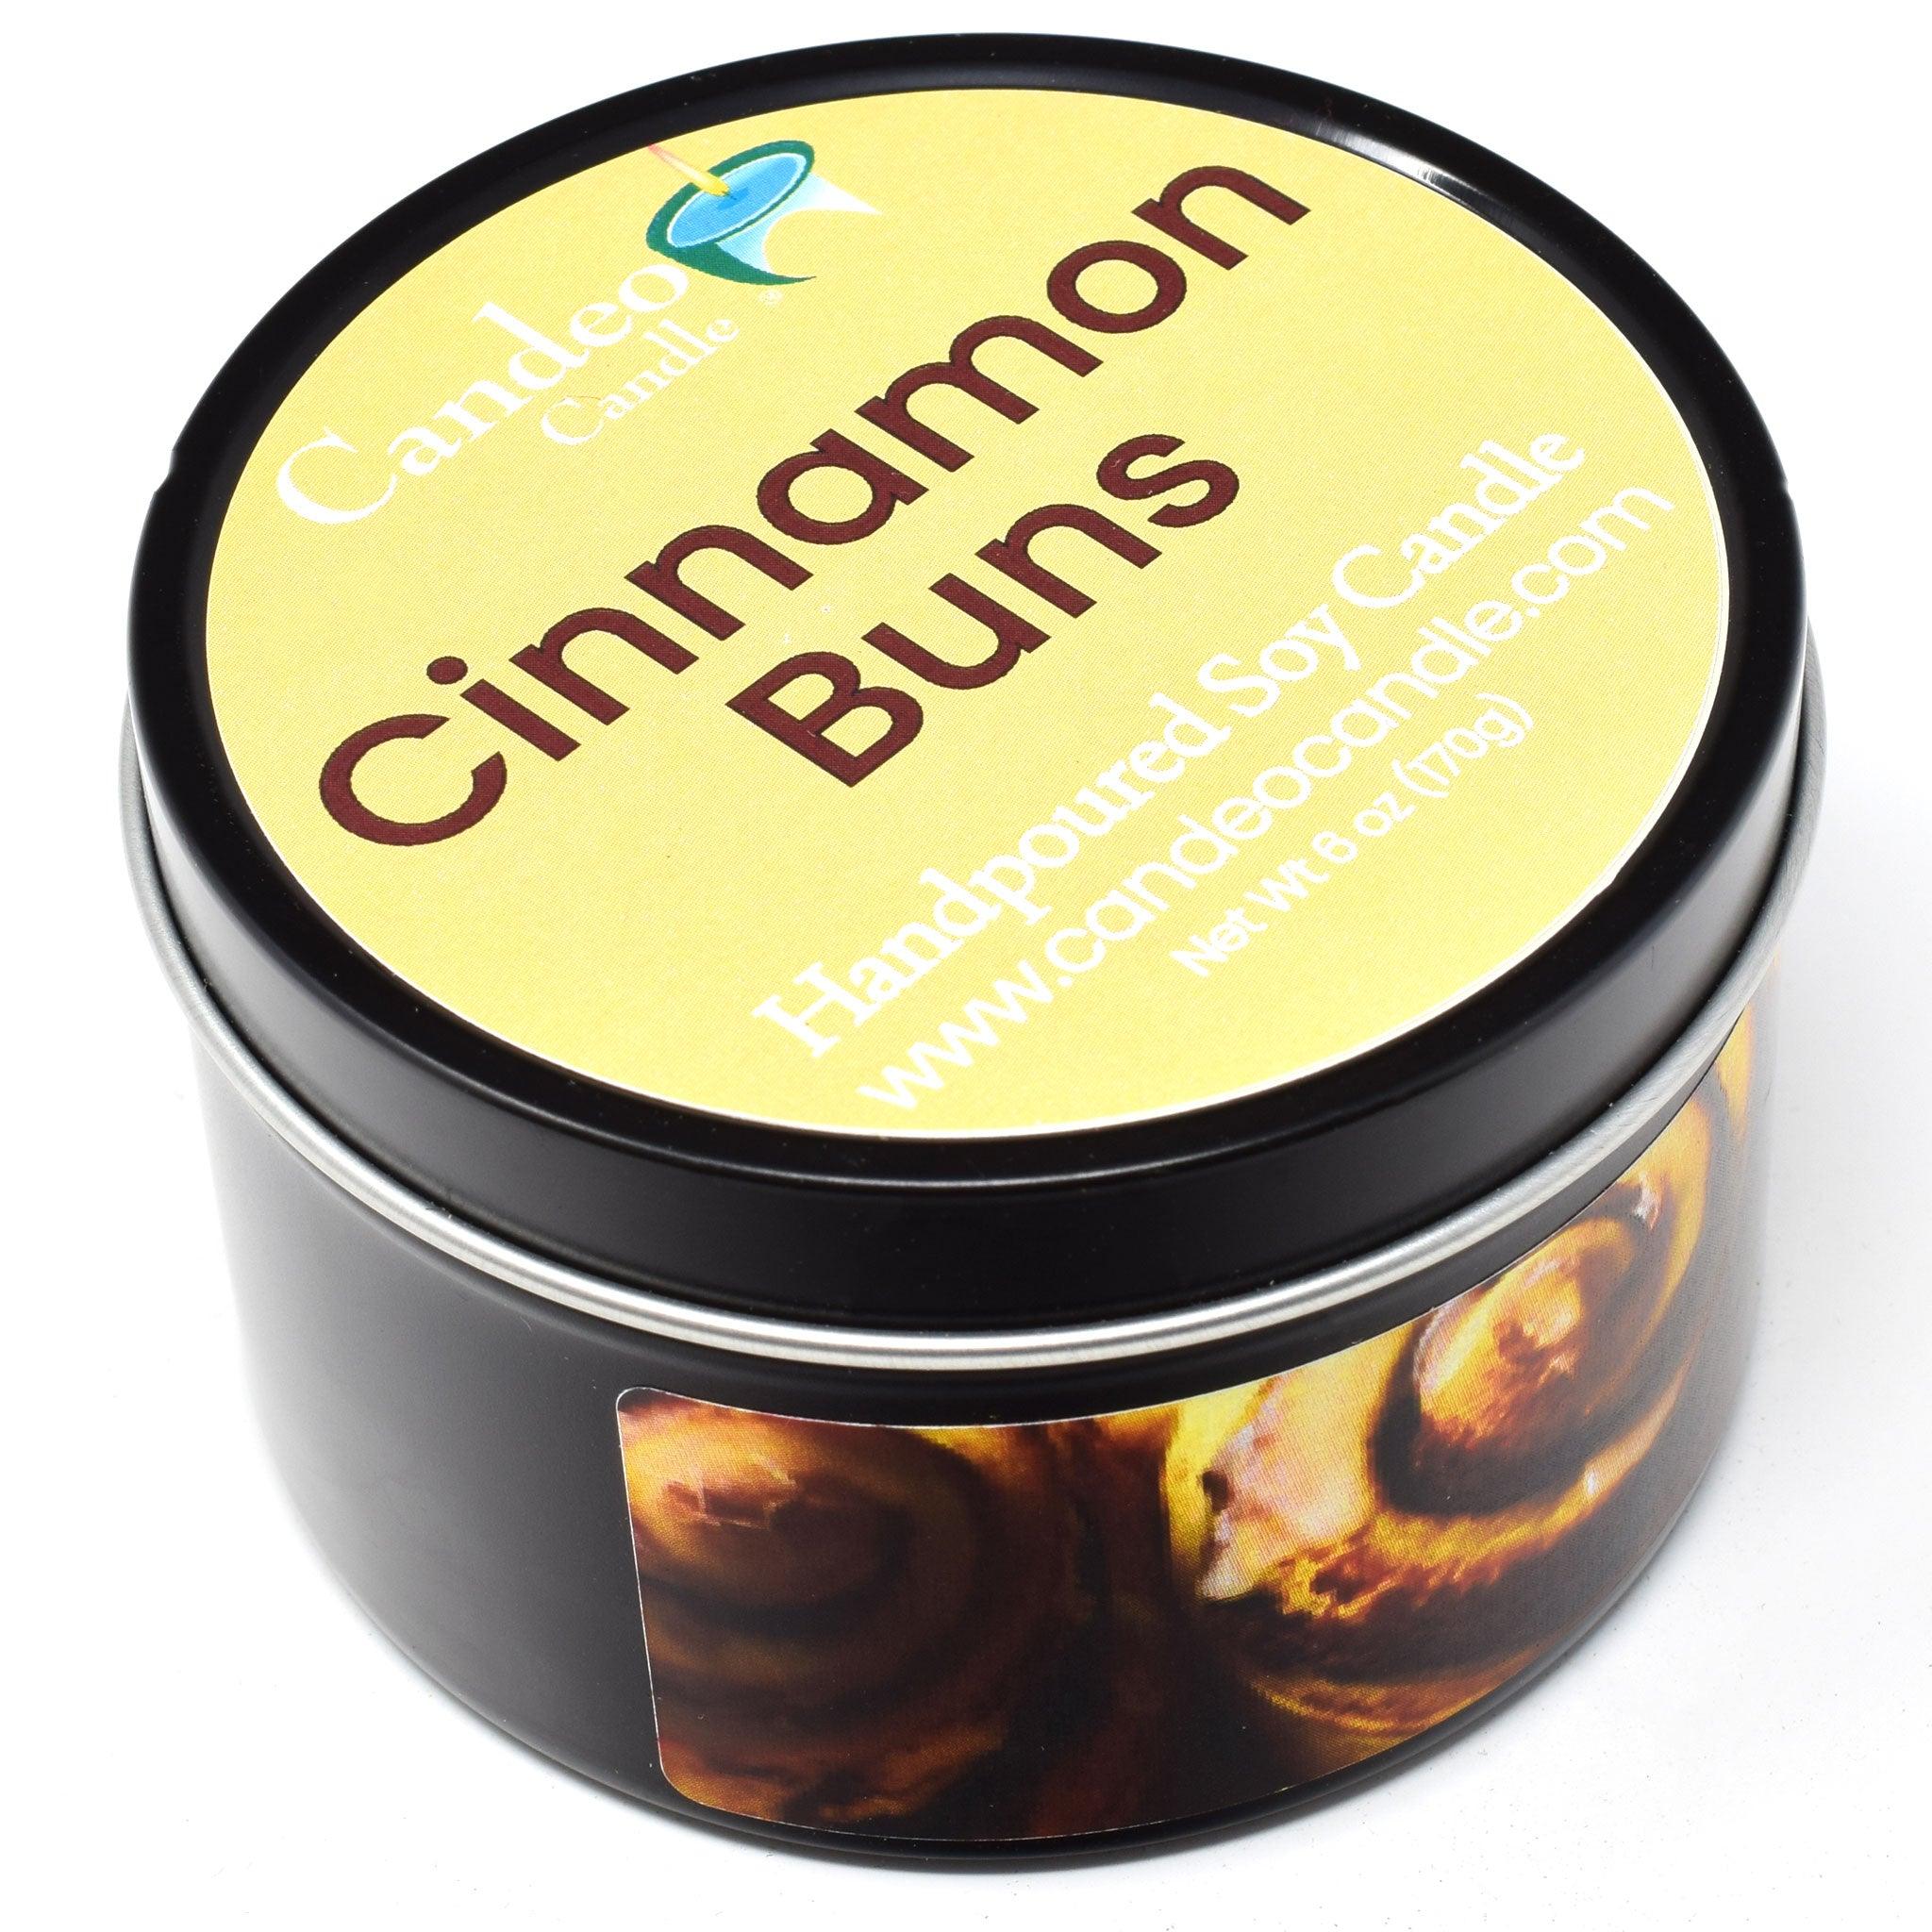 Cinnamon Buns, 6oz Soy Candle Tin - Candeo Candle